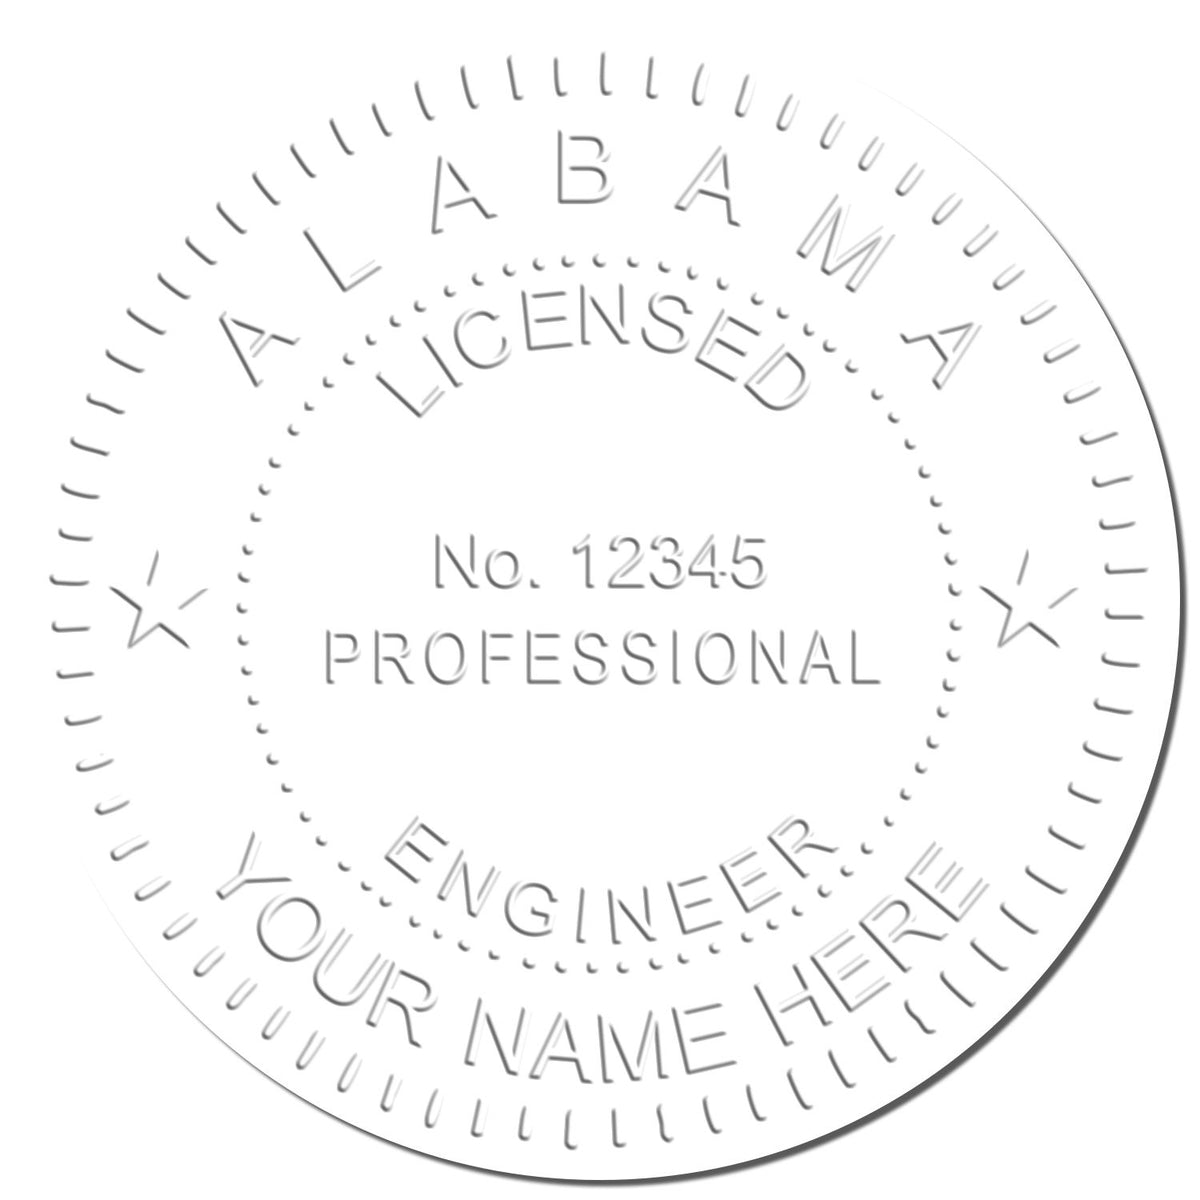 Another Example of a stamped impression of the Alabama Engineer Desk Seal on a piece of office paper.